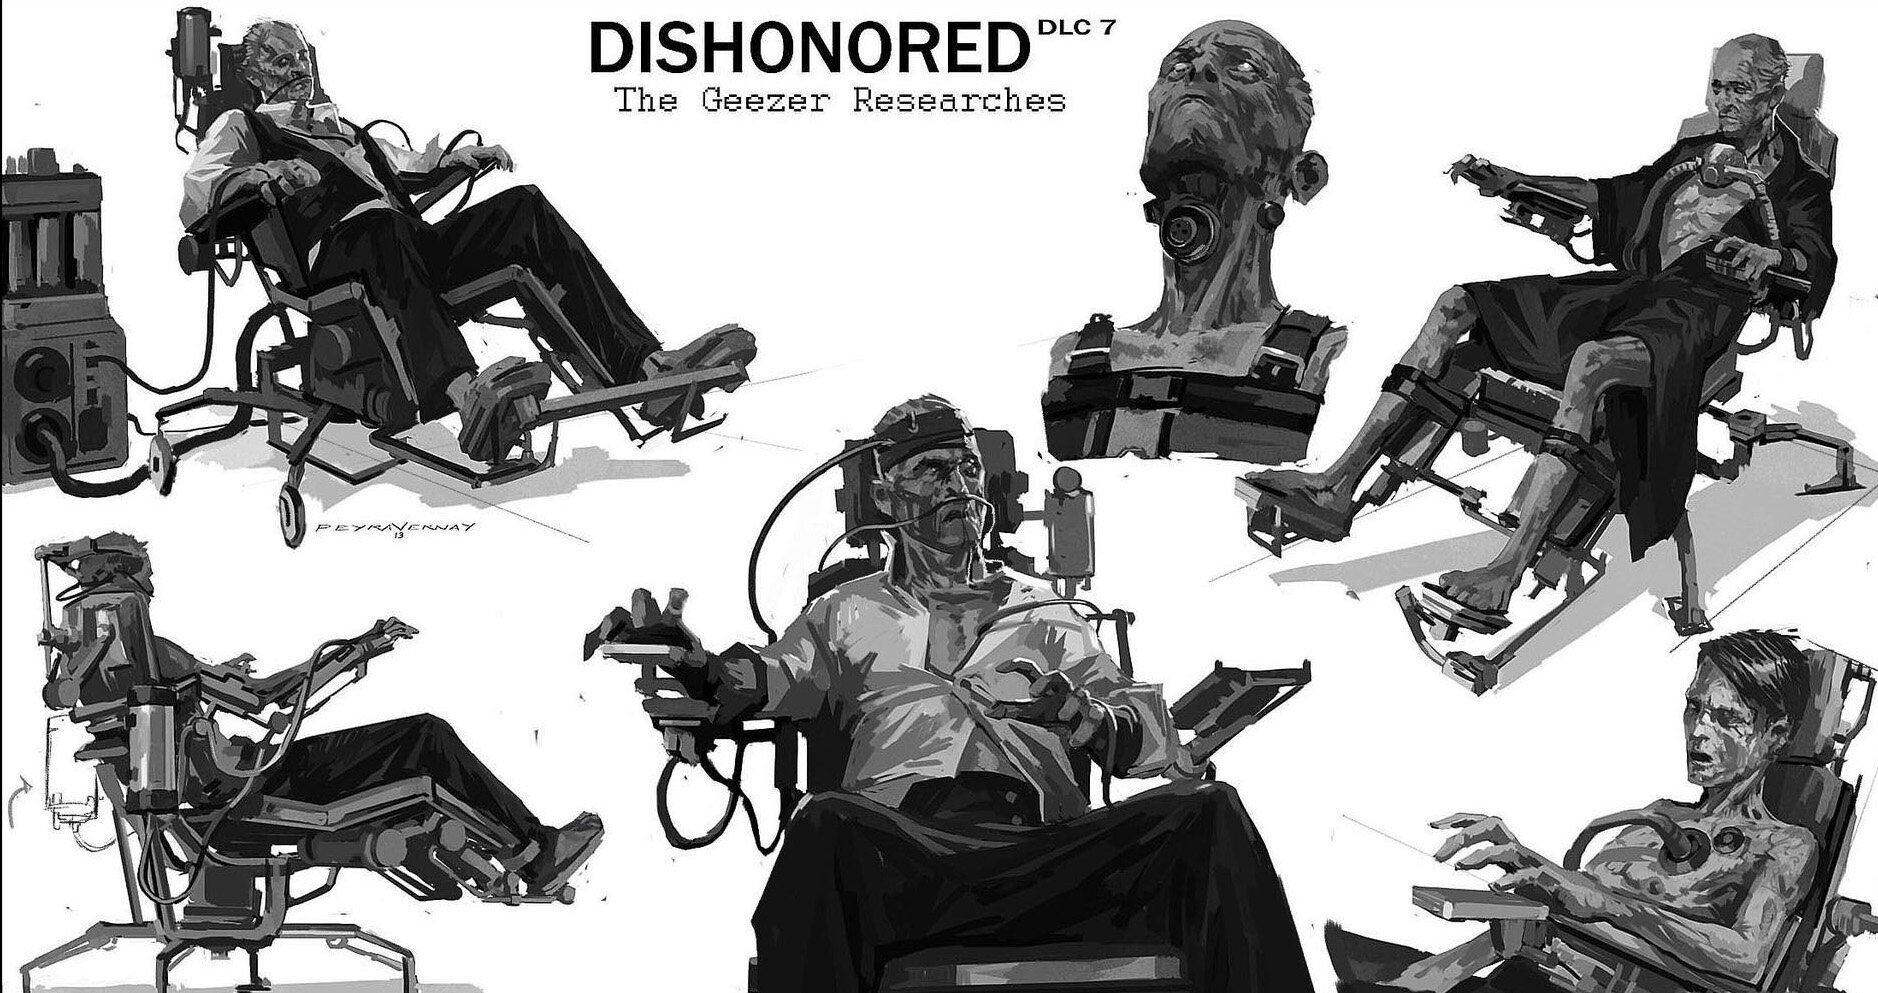 Dishonored, "The Brigmore Witches", New DLC Pictures